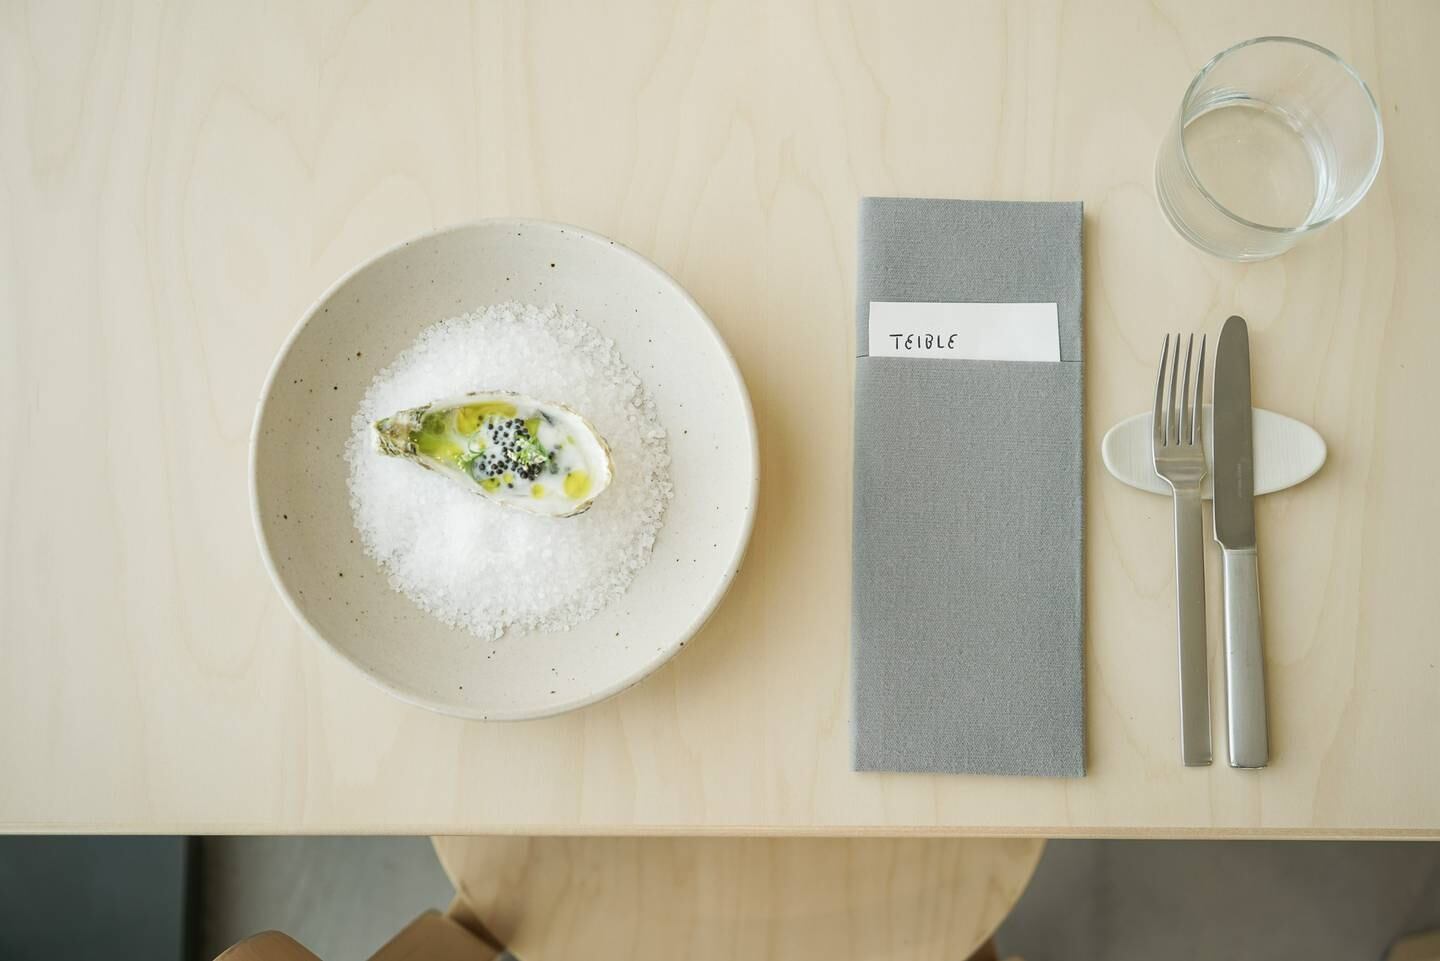 The restaurant focuses on fresh, local, seasonal and creatively combined ingredients. Photo: Teible